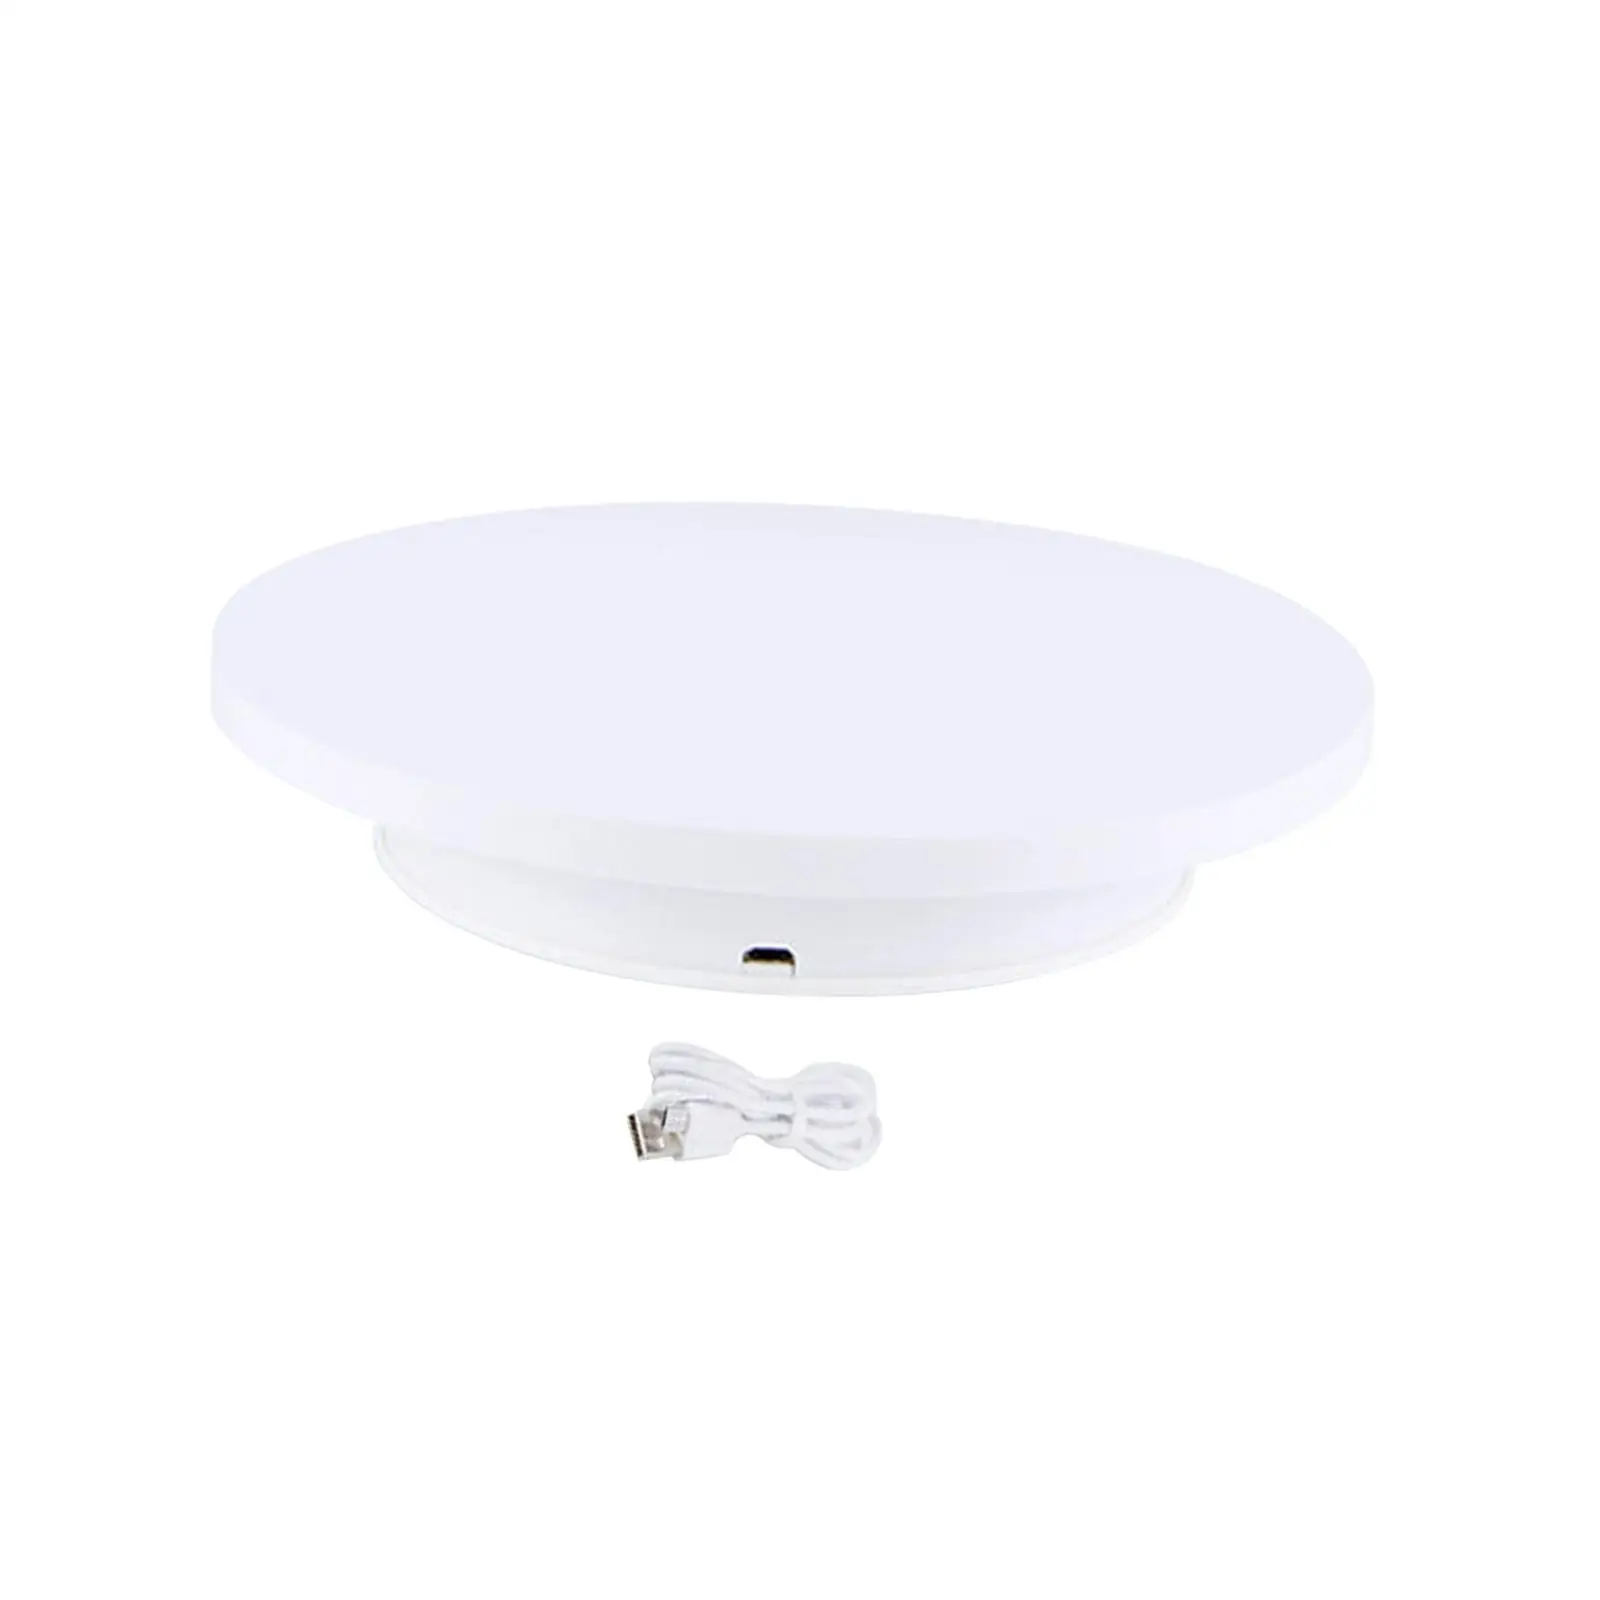 360 Degree Rotating Display Stand Rotating Turntable Jewelry Holder for Photography Products Shows 3D Models Video Shooting Cake